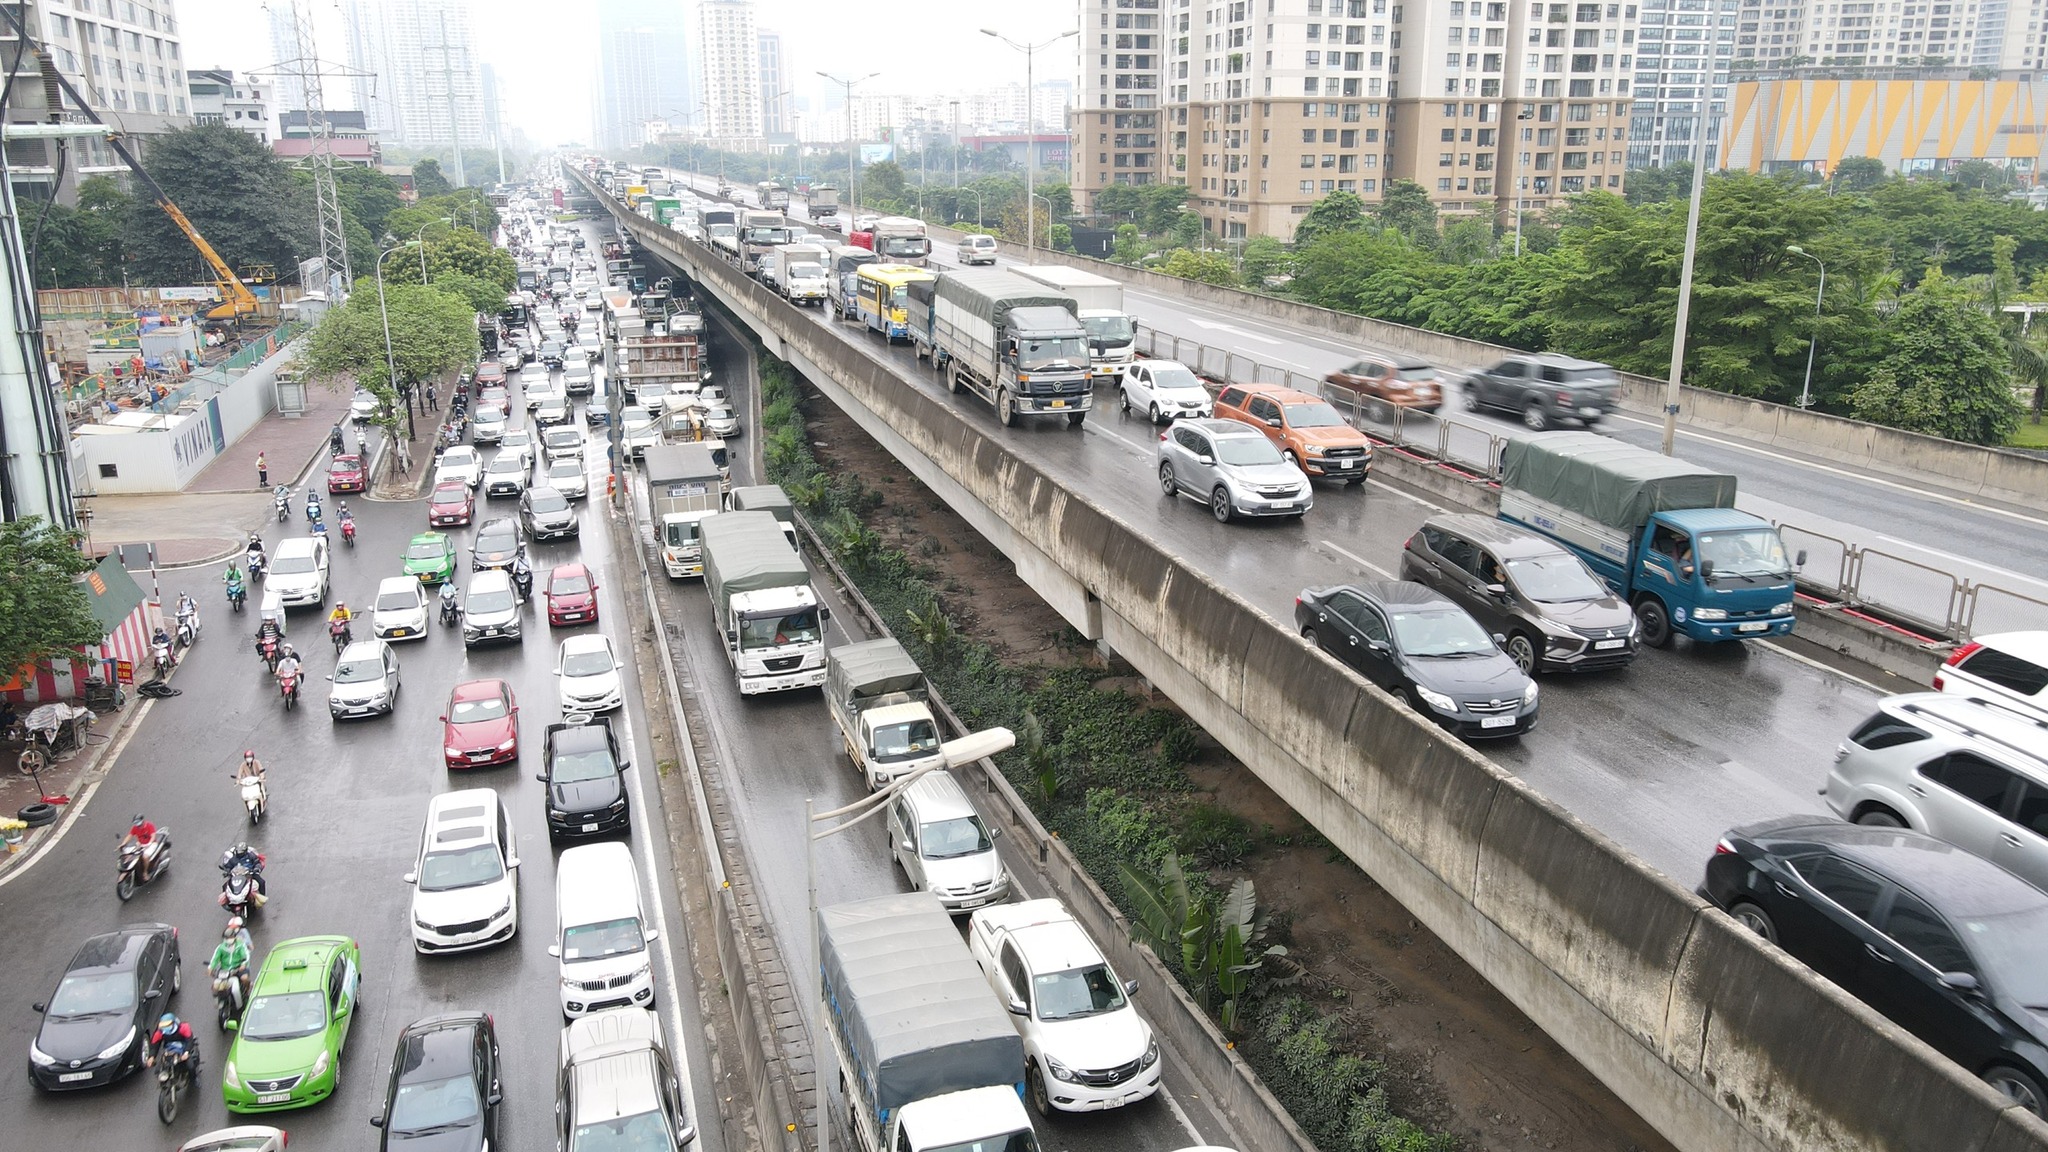 The line of cars followed each other back to their hometown for the holidays of April 30 and May 1, the roads of Hanoi and Ho Chi Minh City were jammed - 10